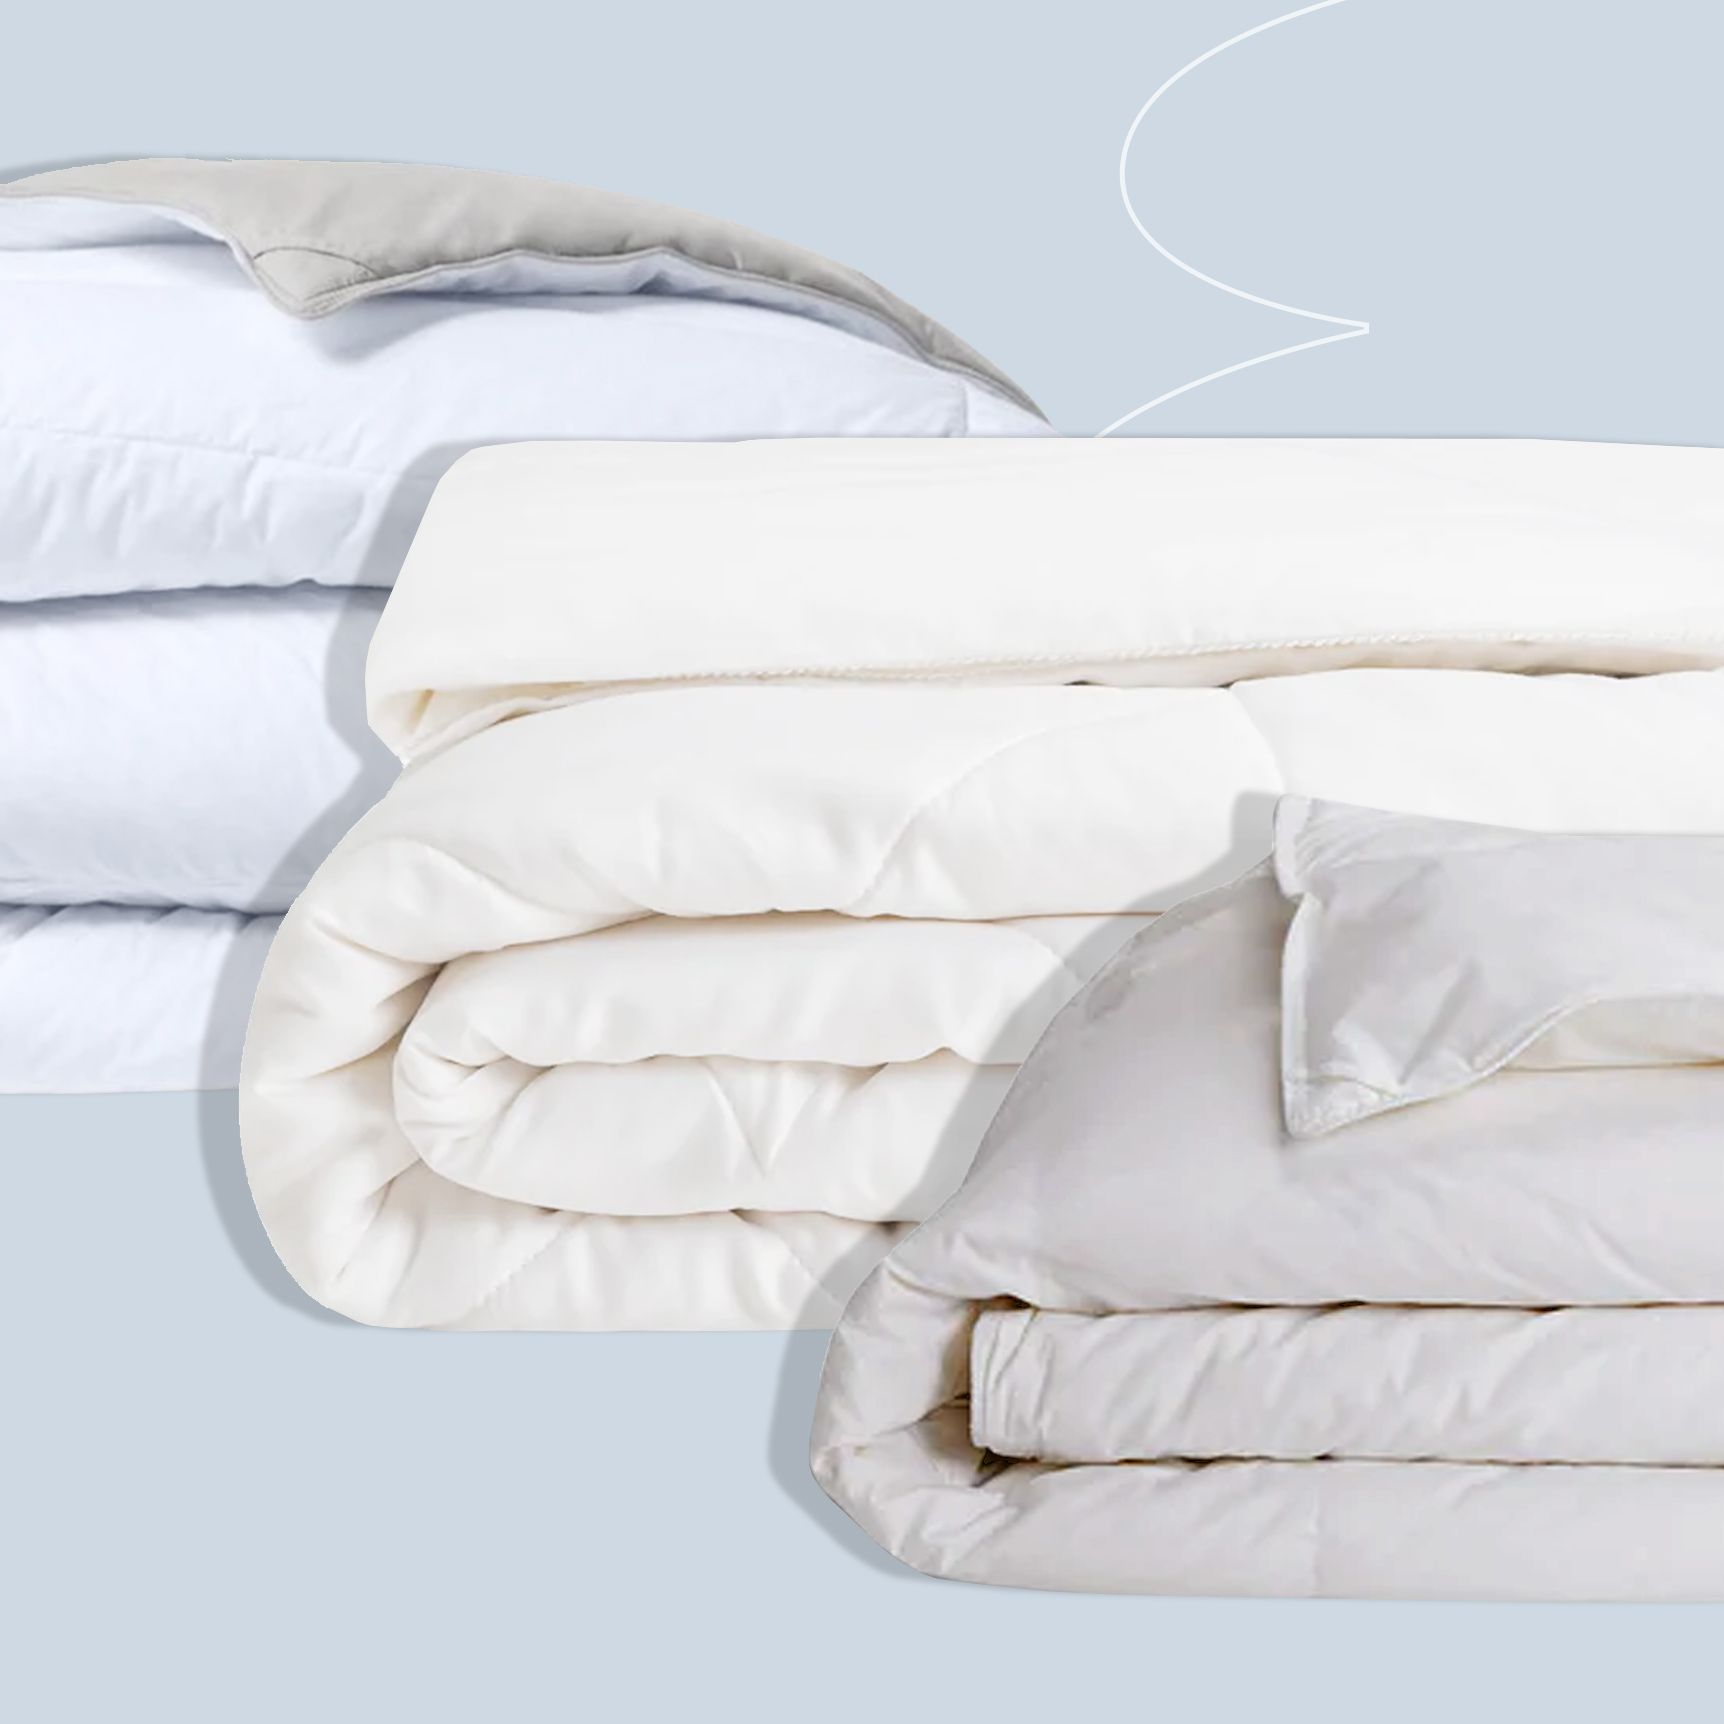 I Tested Tons of Duvet Inserts—These 3 Are the Very Best